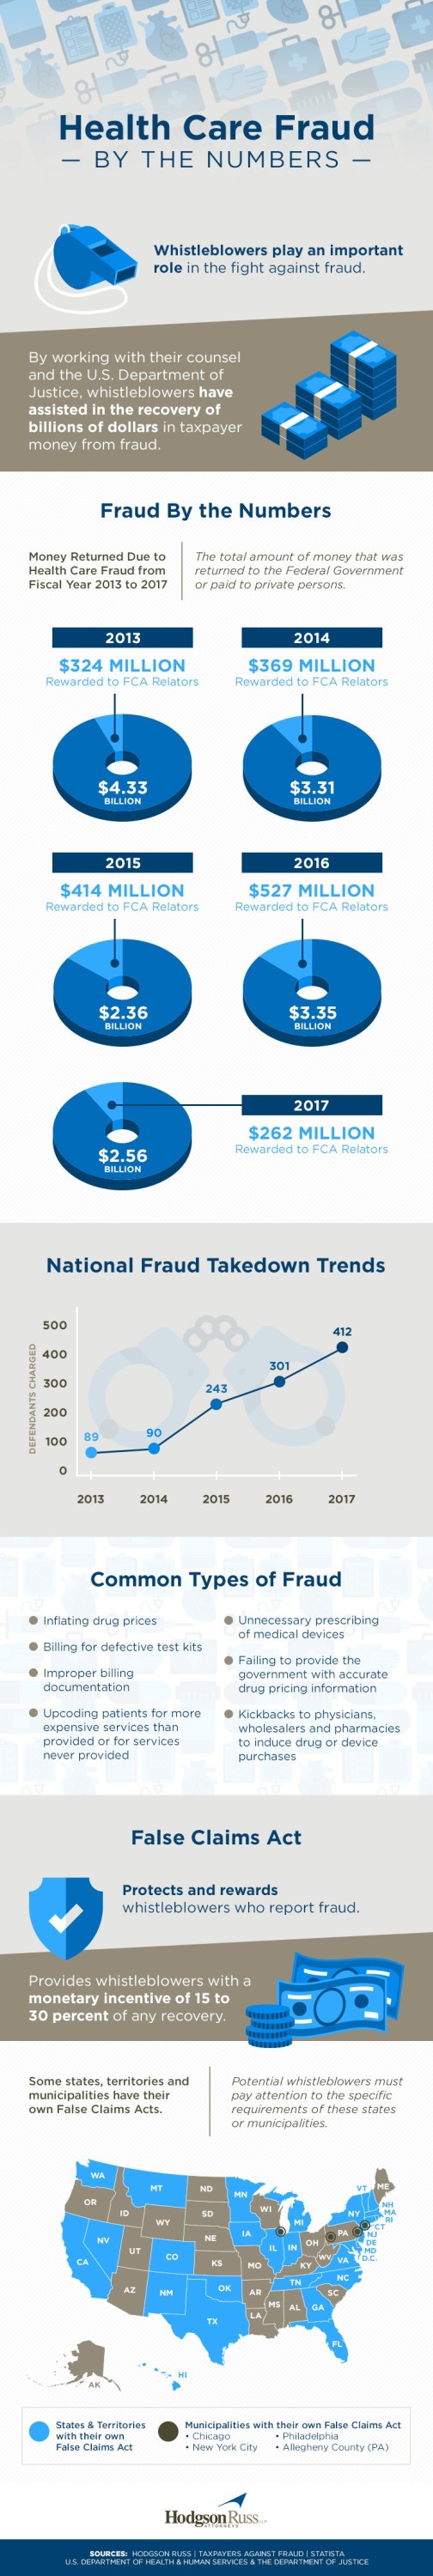 health care fraud micrographic by the numbers